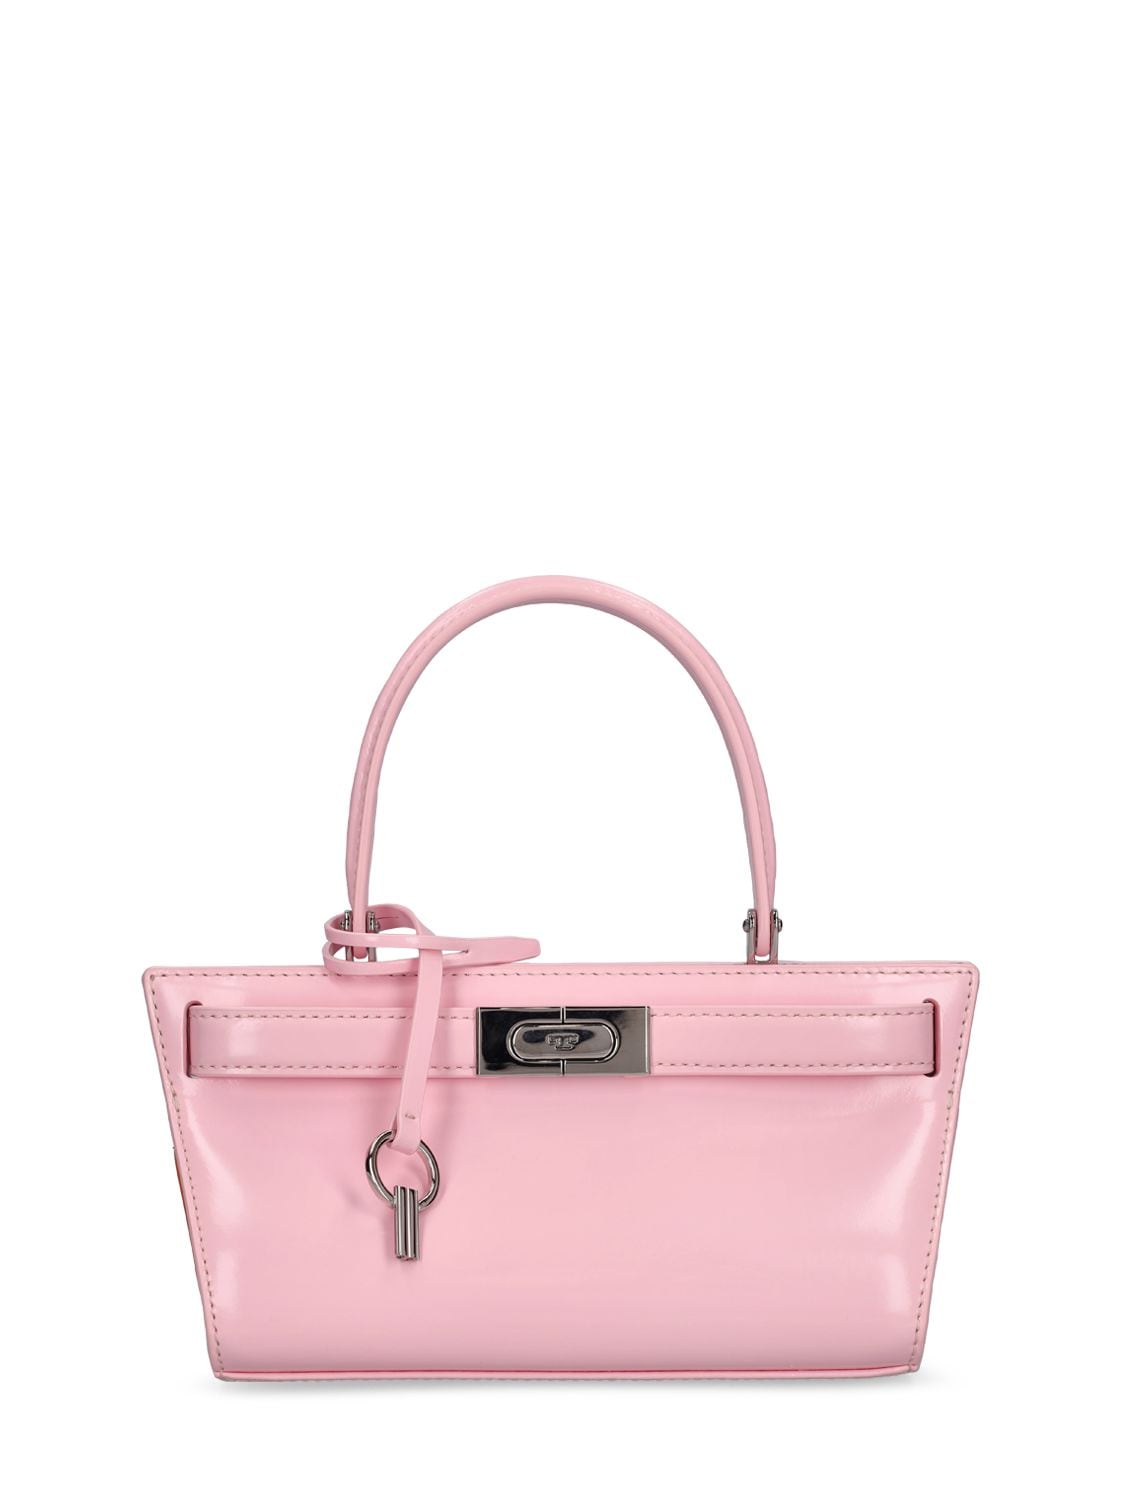 Tory Burch Petite Lee Radziwill Leather Bag In Pink Plie